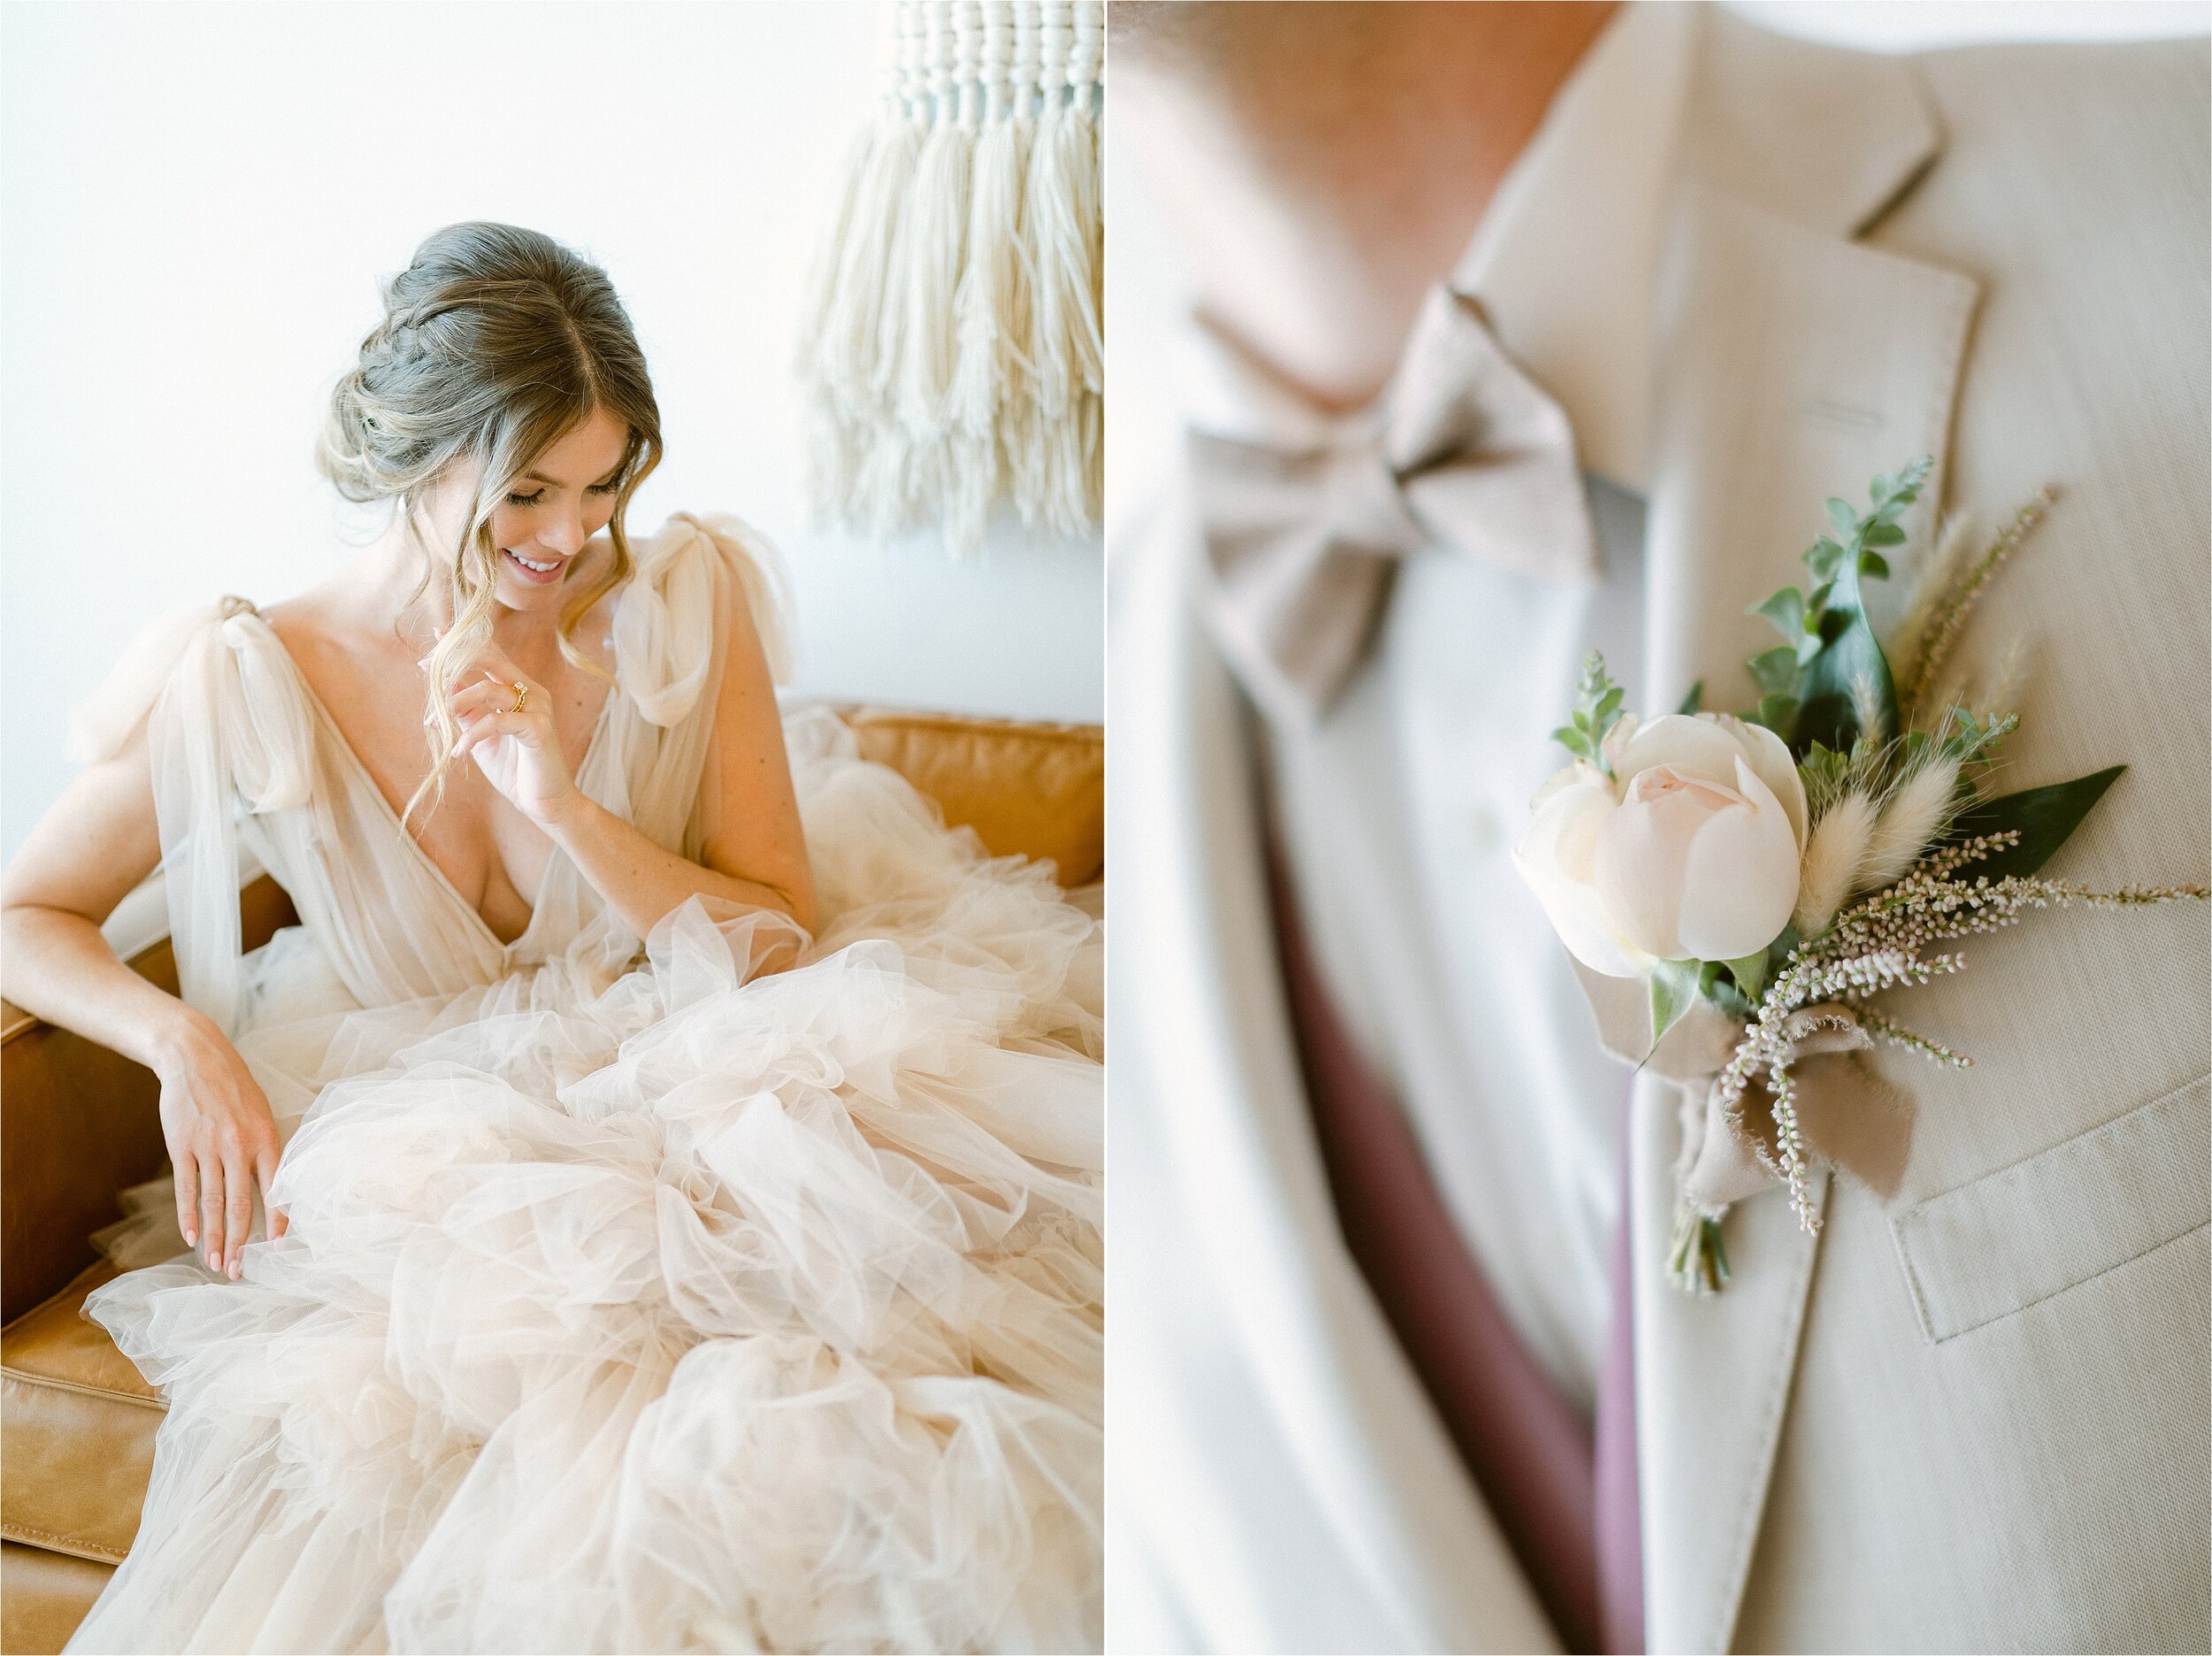 Neutral toned micro wedding details.  Image on left shows bride in nude tulle gown sitting on leather couch, smiling down at her gown.  Image on the right shows groom's cream colored boutonnière 